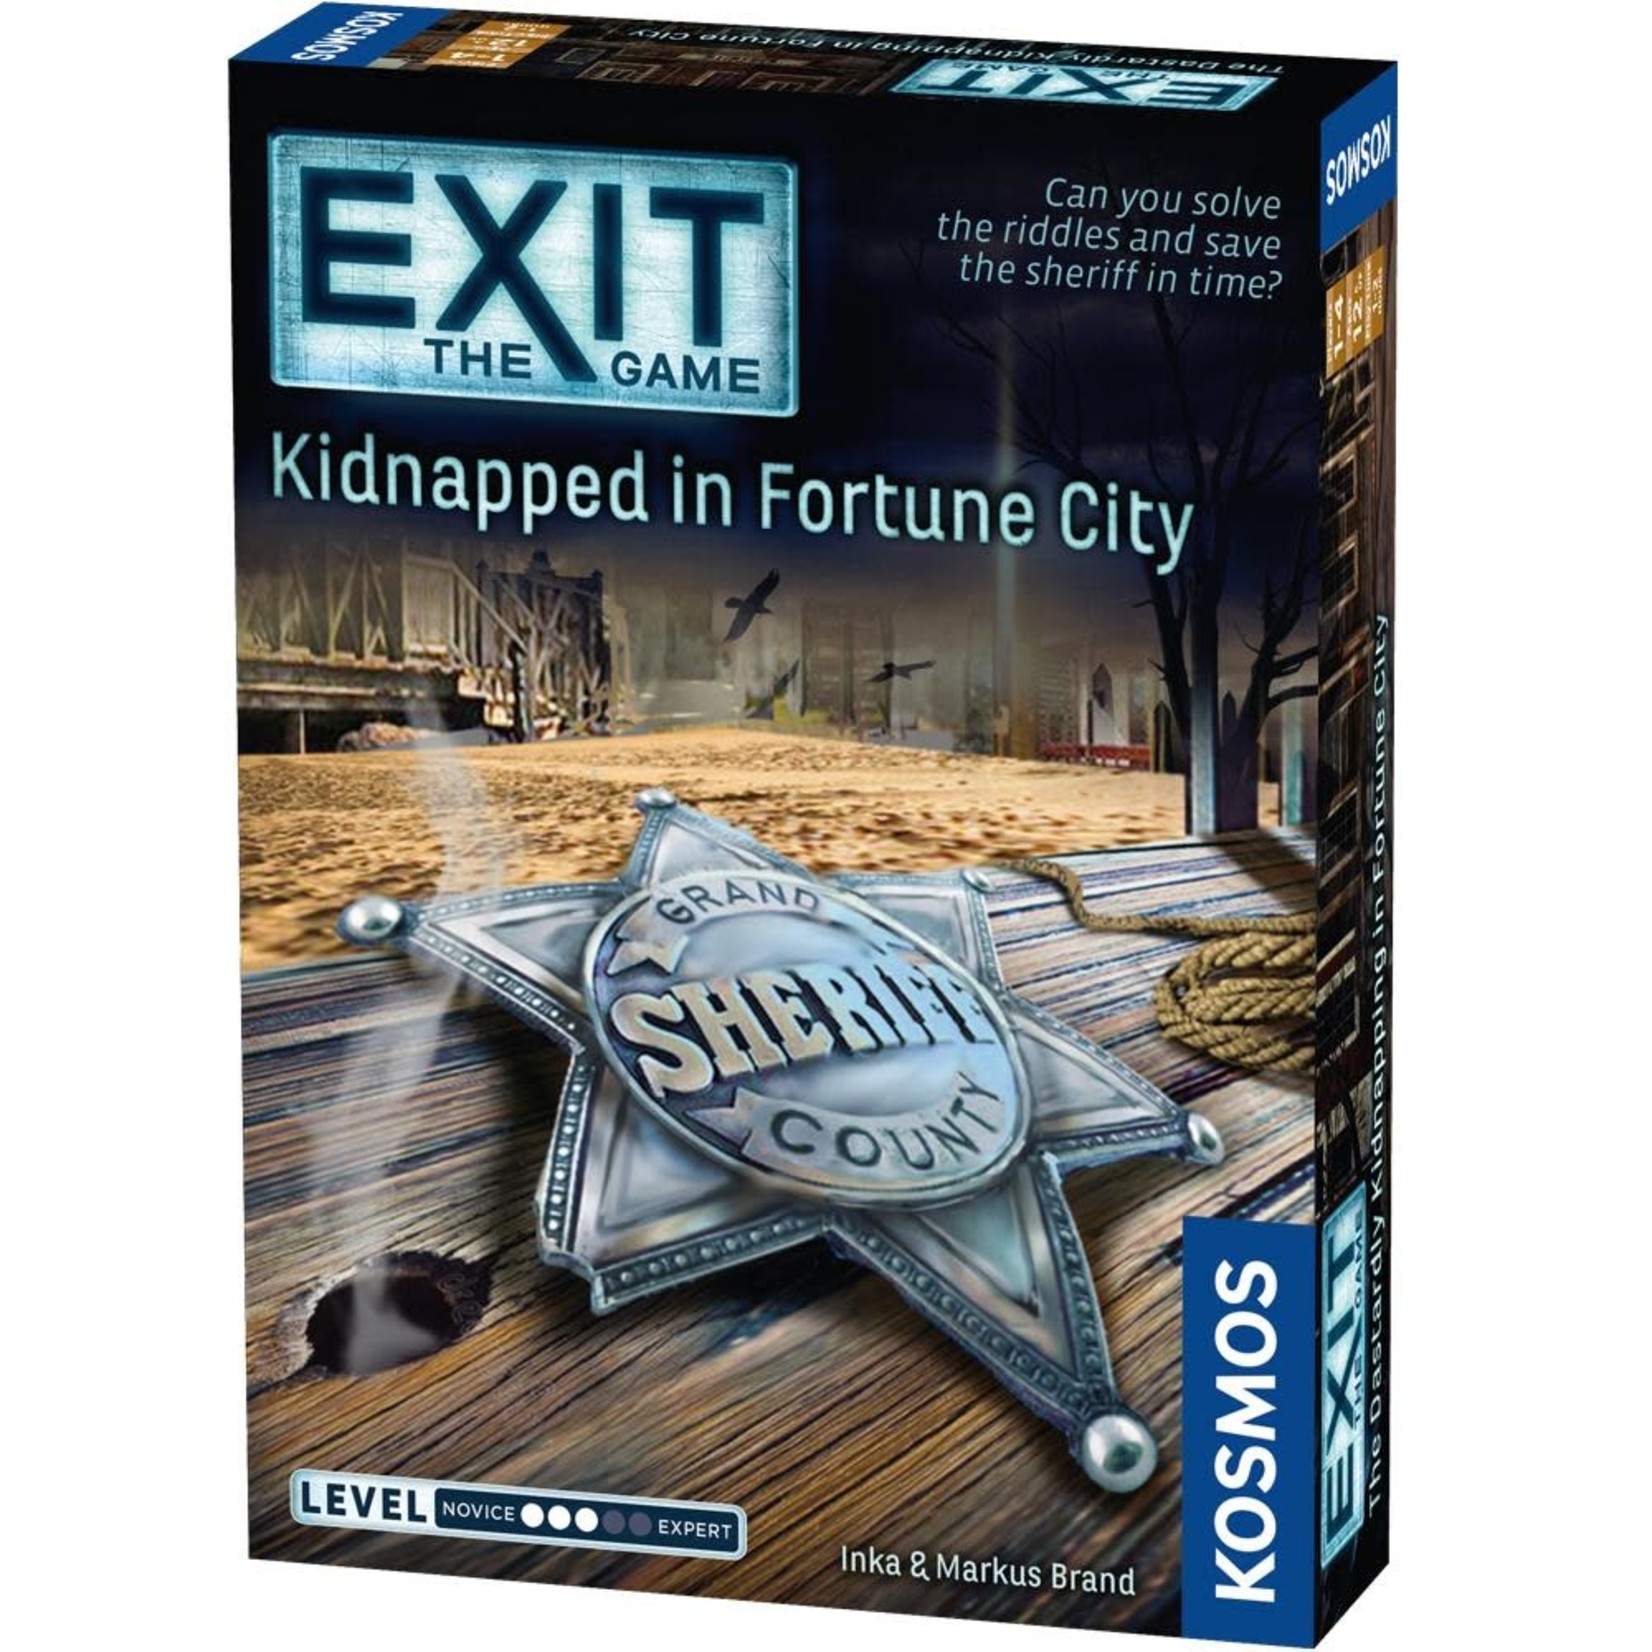 Thames and Kosmos Exit Kidnapped in Fortune City